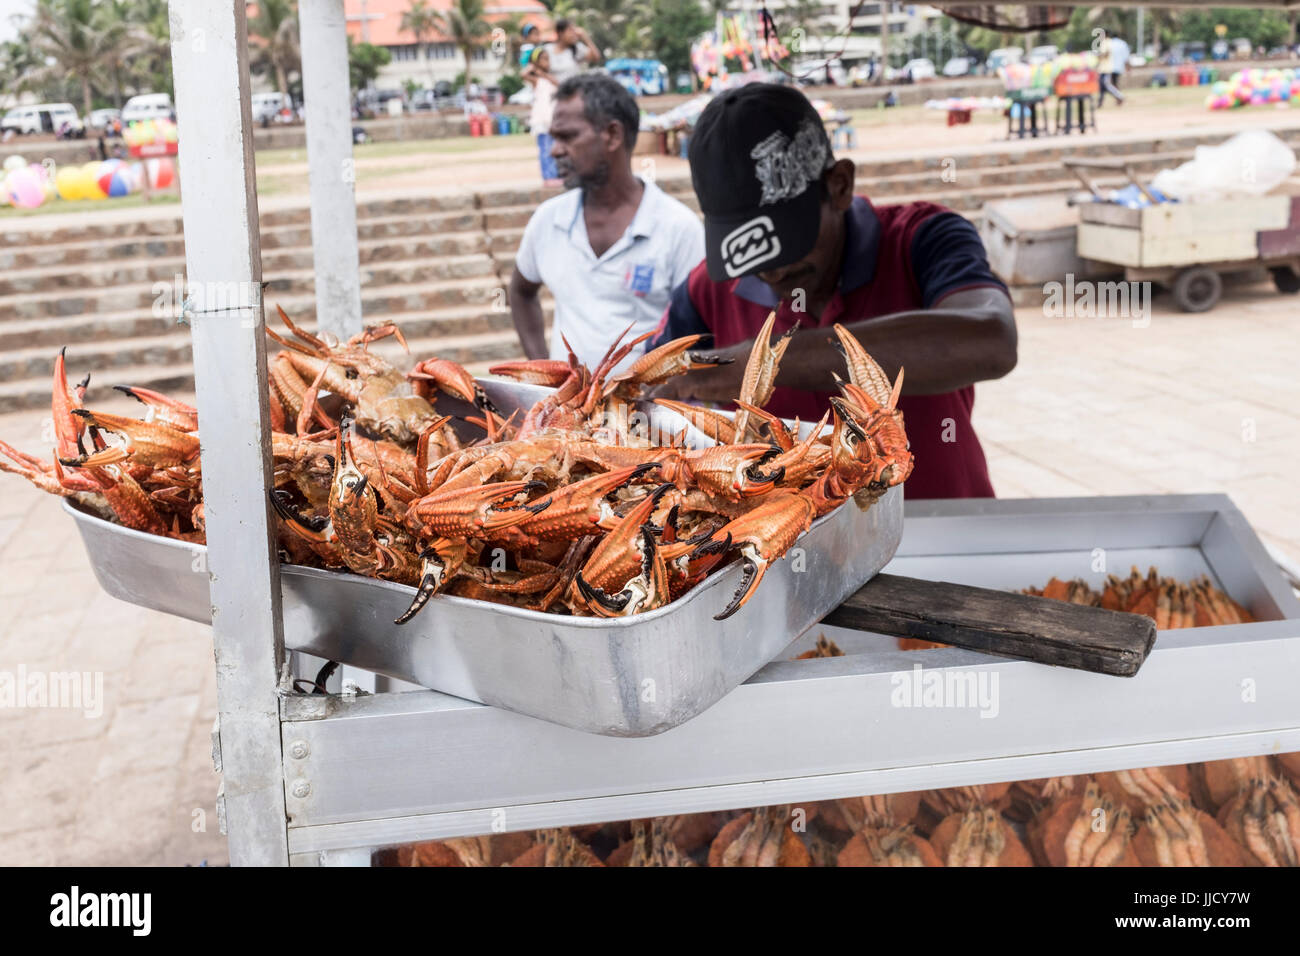 A street vendor sells crab and other food from a stall on Galle Face Green in Colombo, Sri Lanka Stock Photo